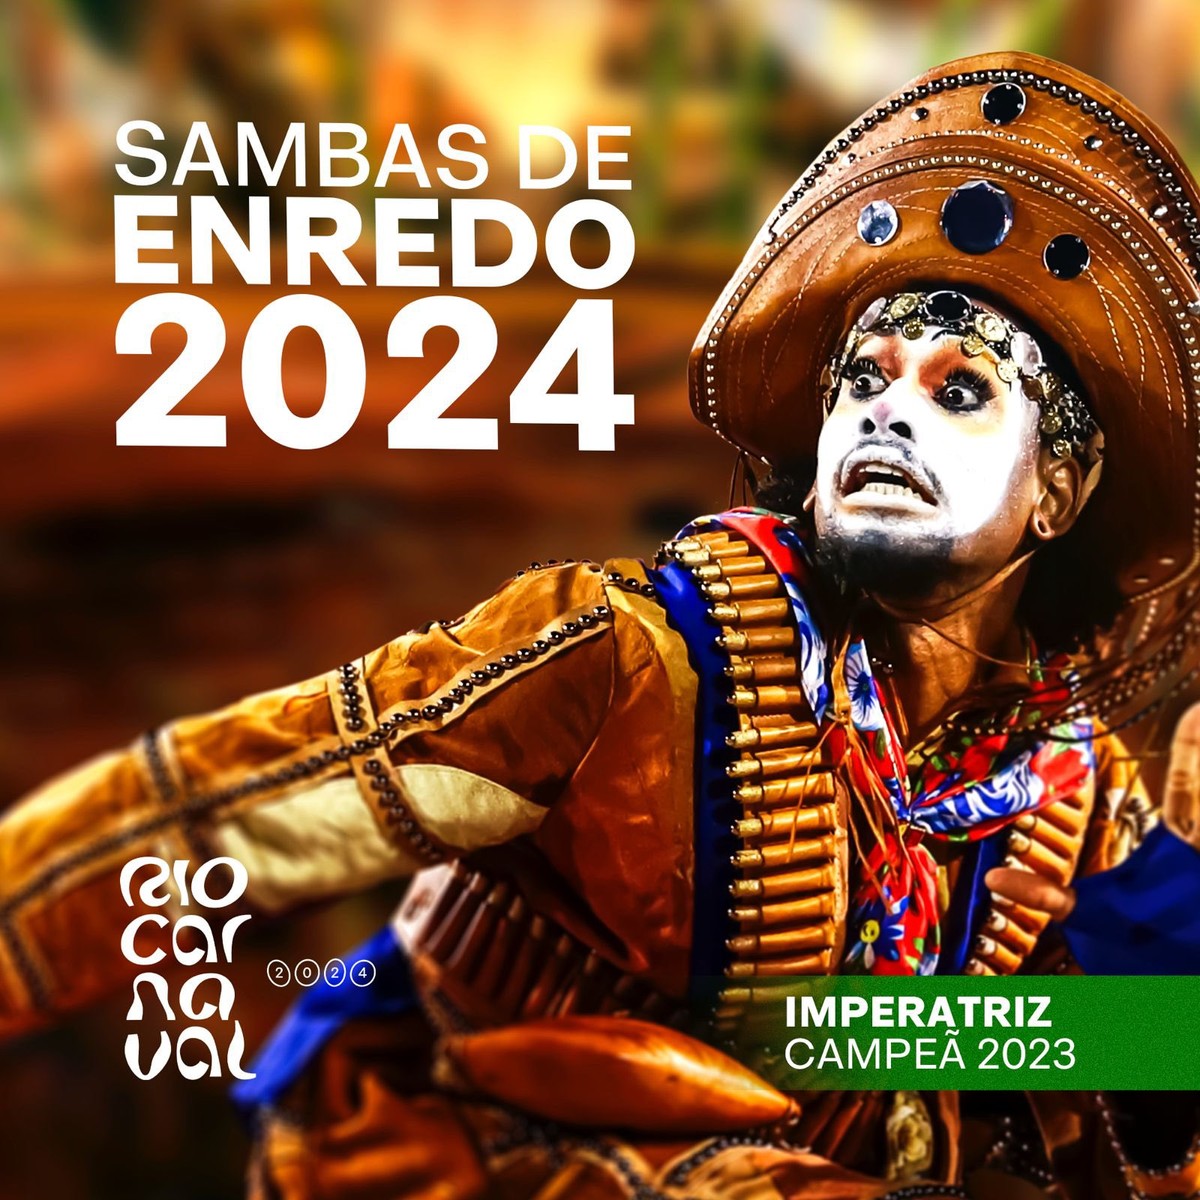 Records with sambas from Carnival 2024 open their doors in December for the Rio festivities